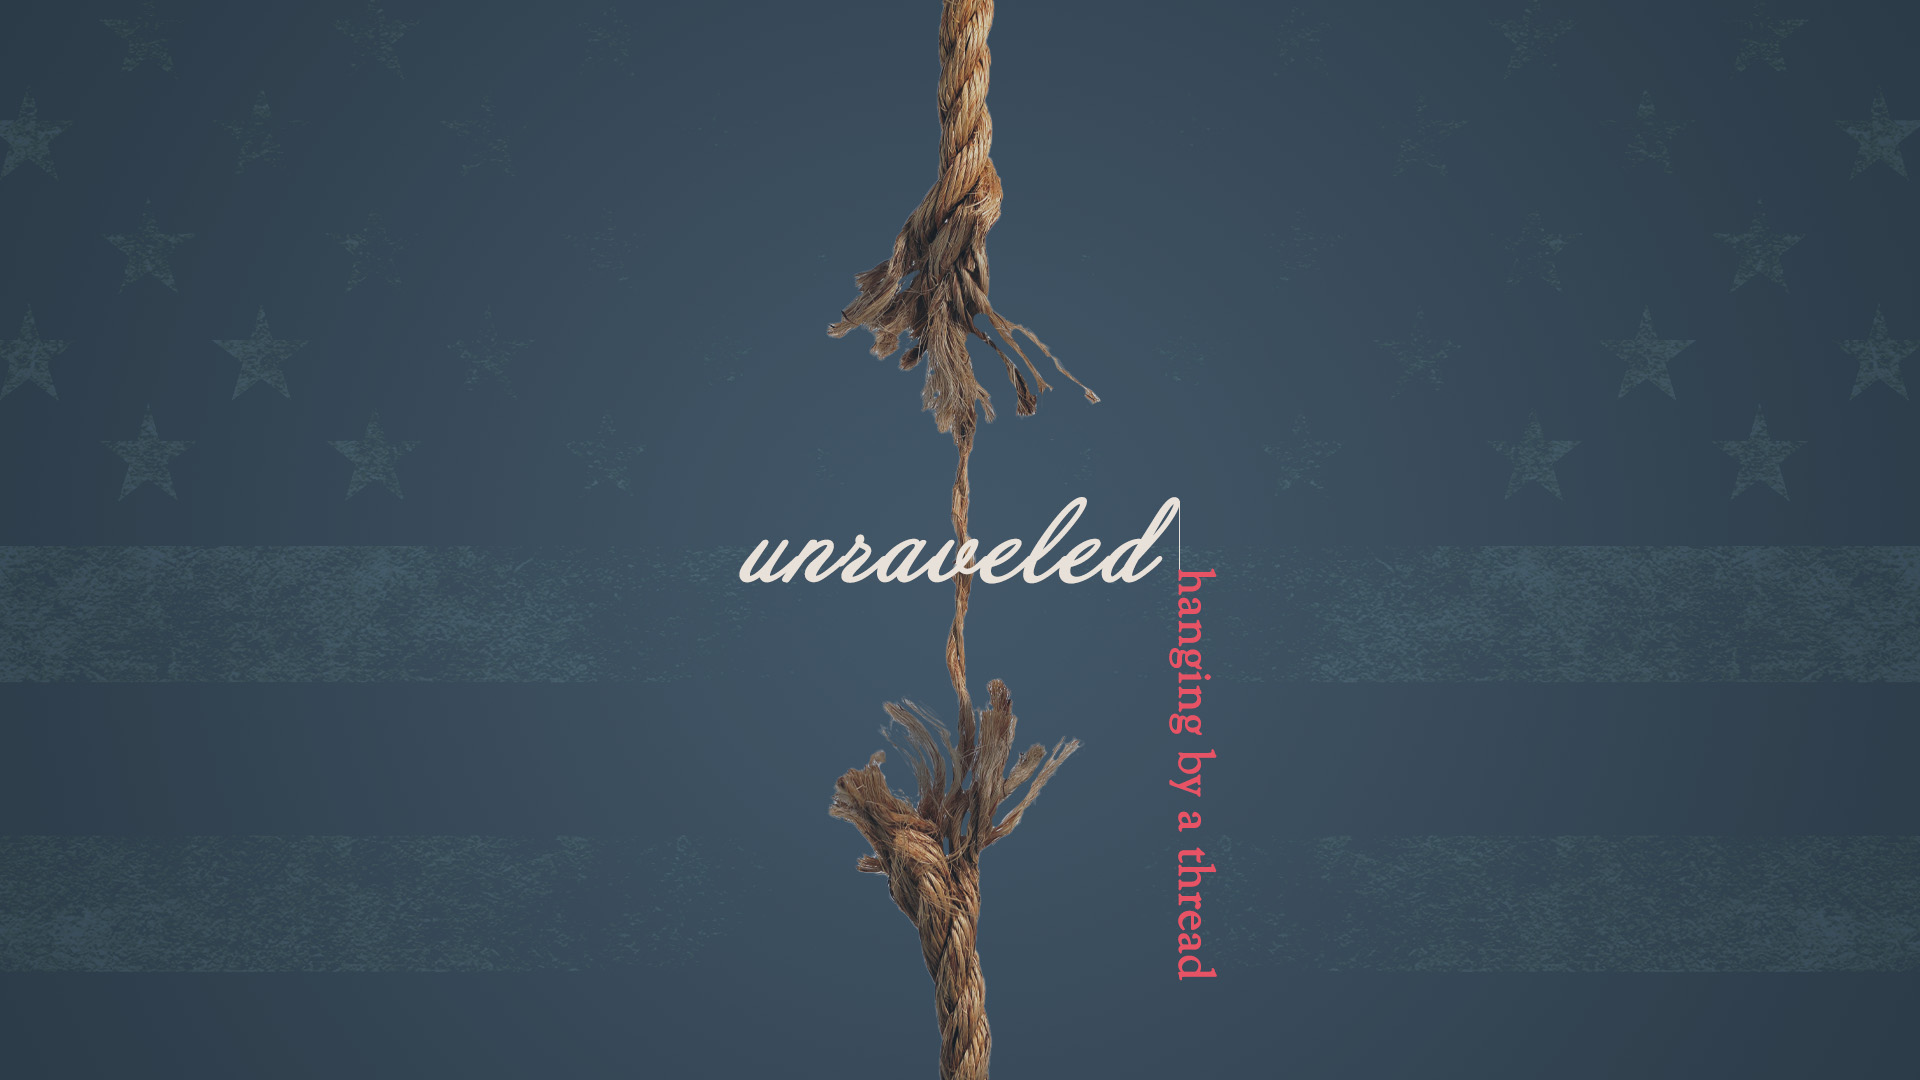 Unraveled:  Hanging By A Thread